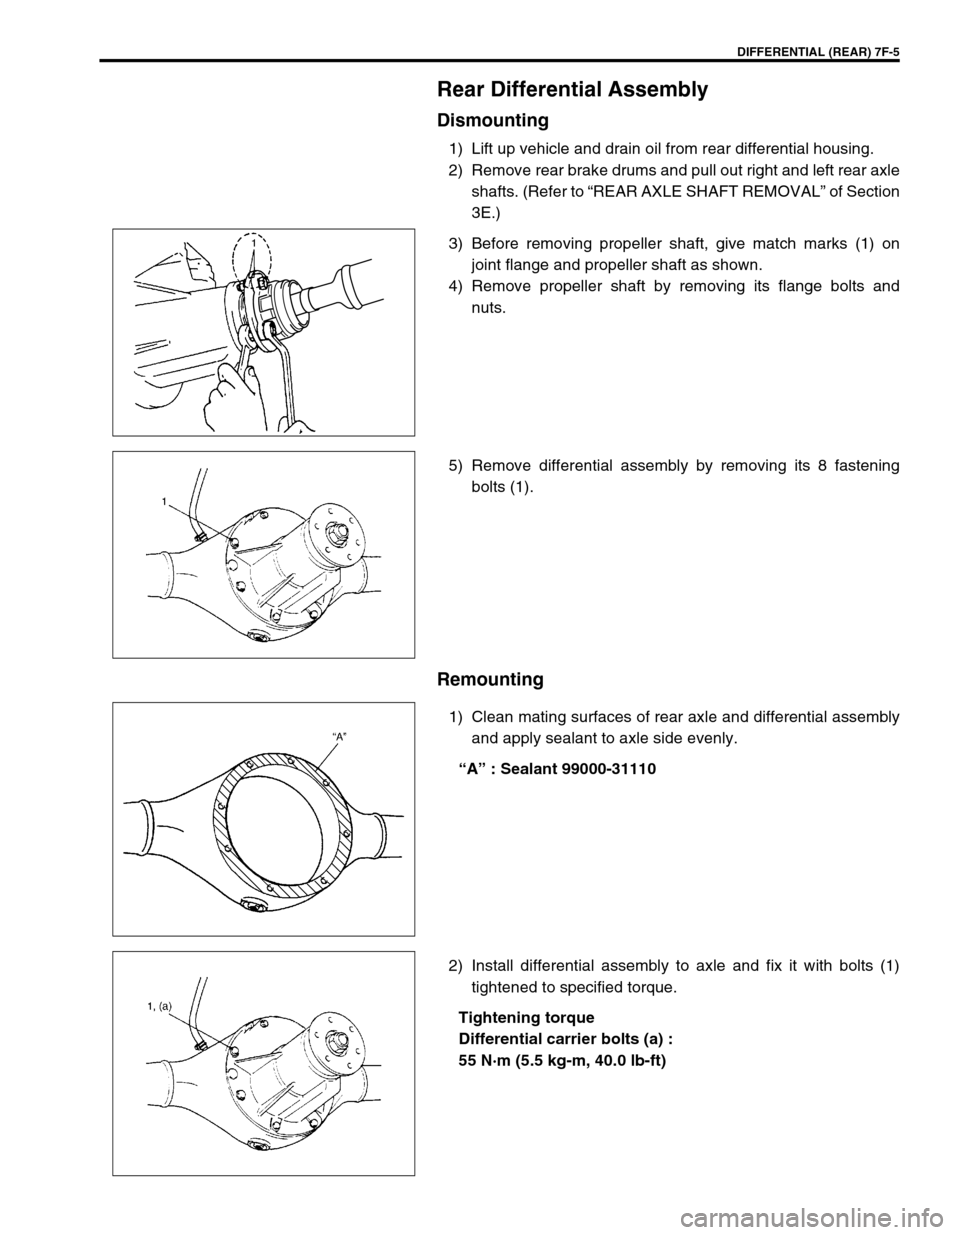 SUZUKI GRAND VITARA 2001 2.G Owners Manual DIFFERENTIAL (REAR) 7F-5
Rear Differential Assembly
Dismounting
1) Lift up vehicle and drain oil from rear differential housing.
2) Remove rear brake drums and pull out right and left rear axle
shafts